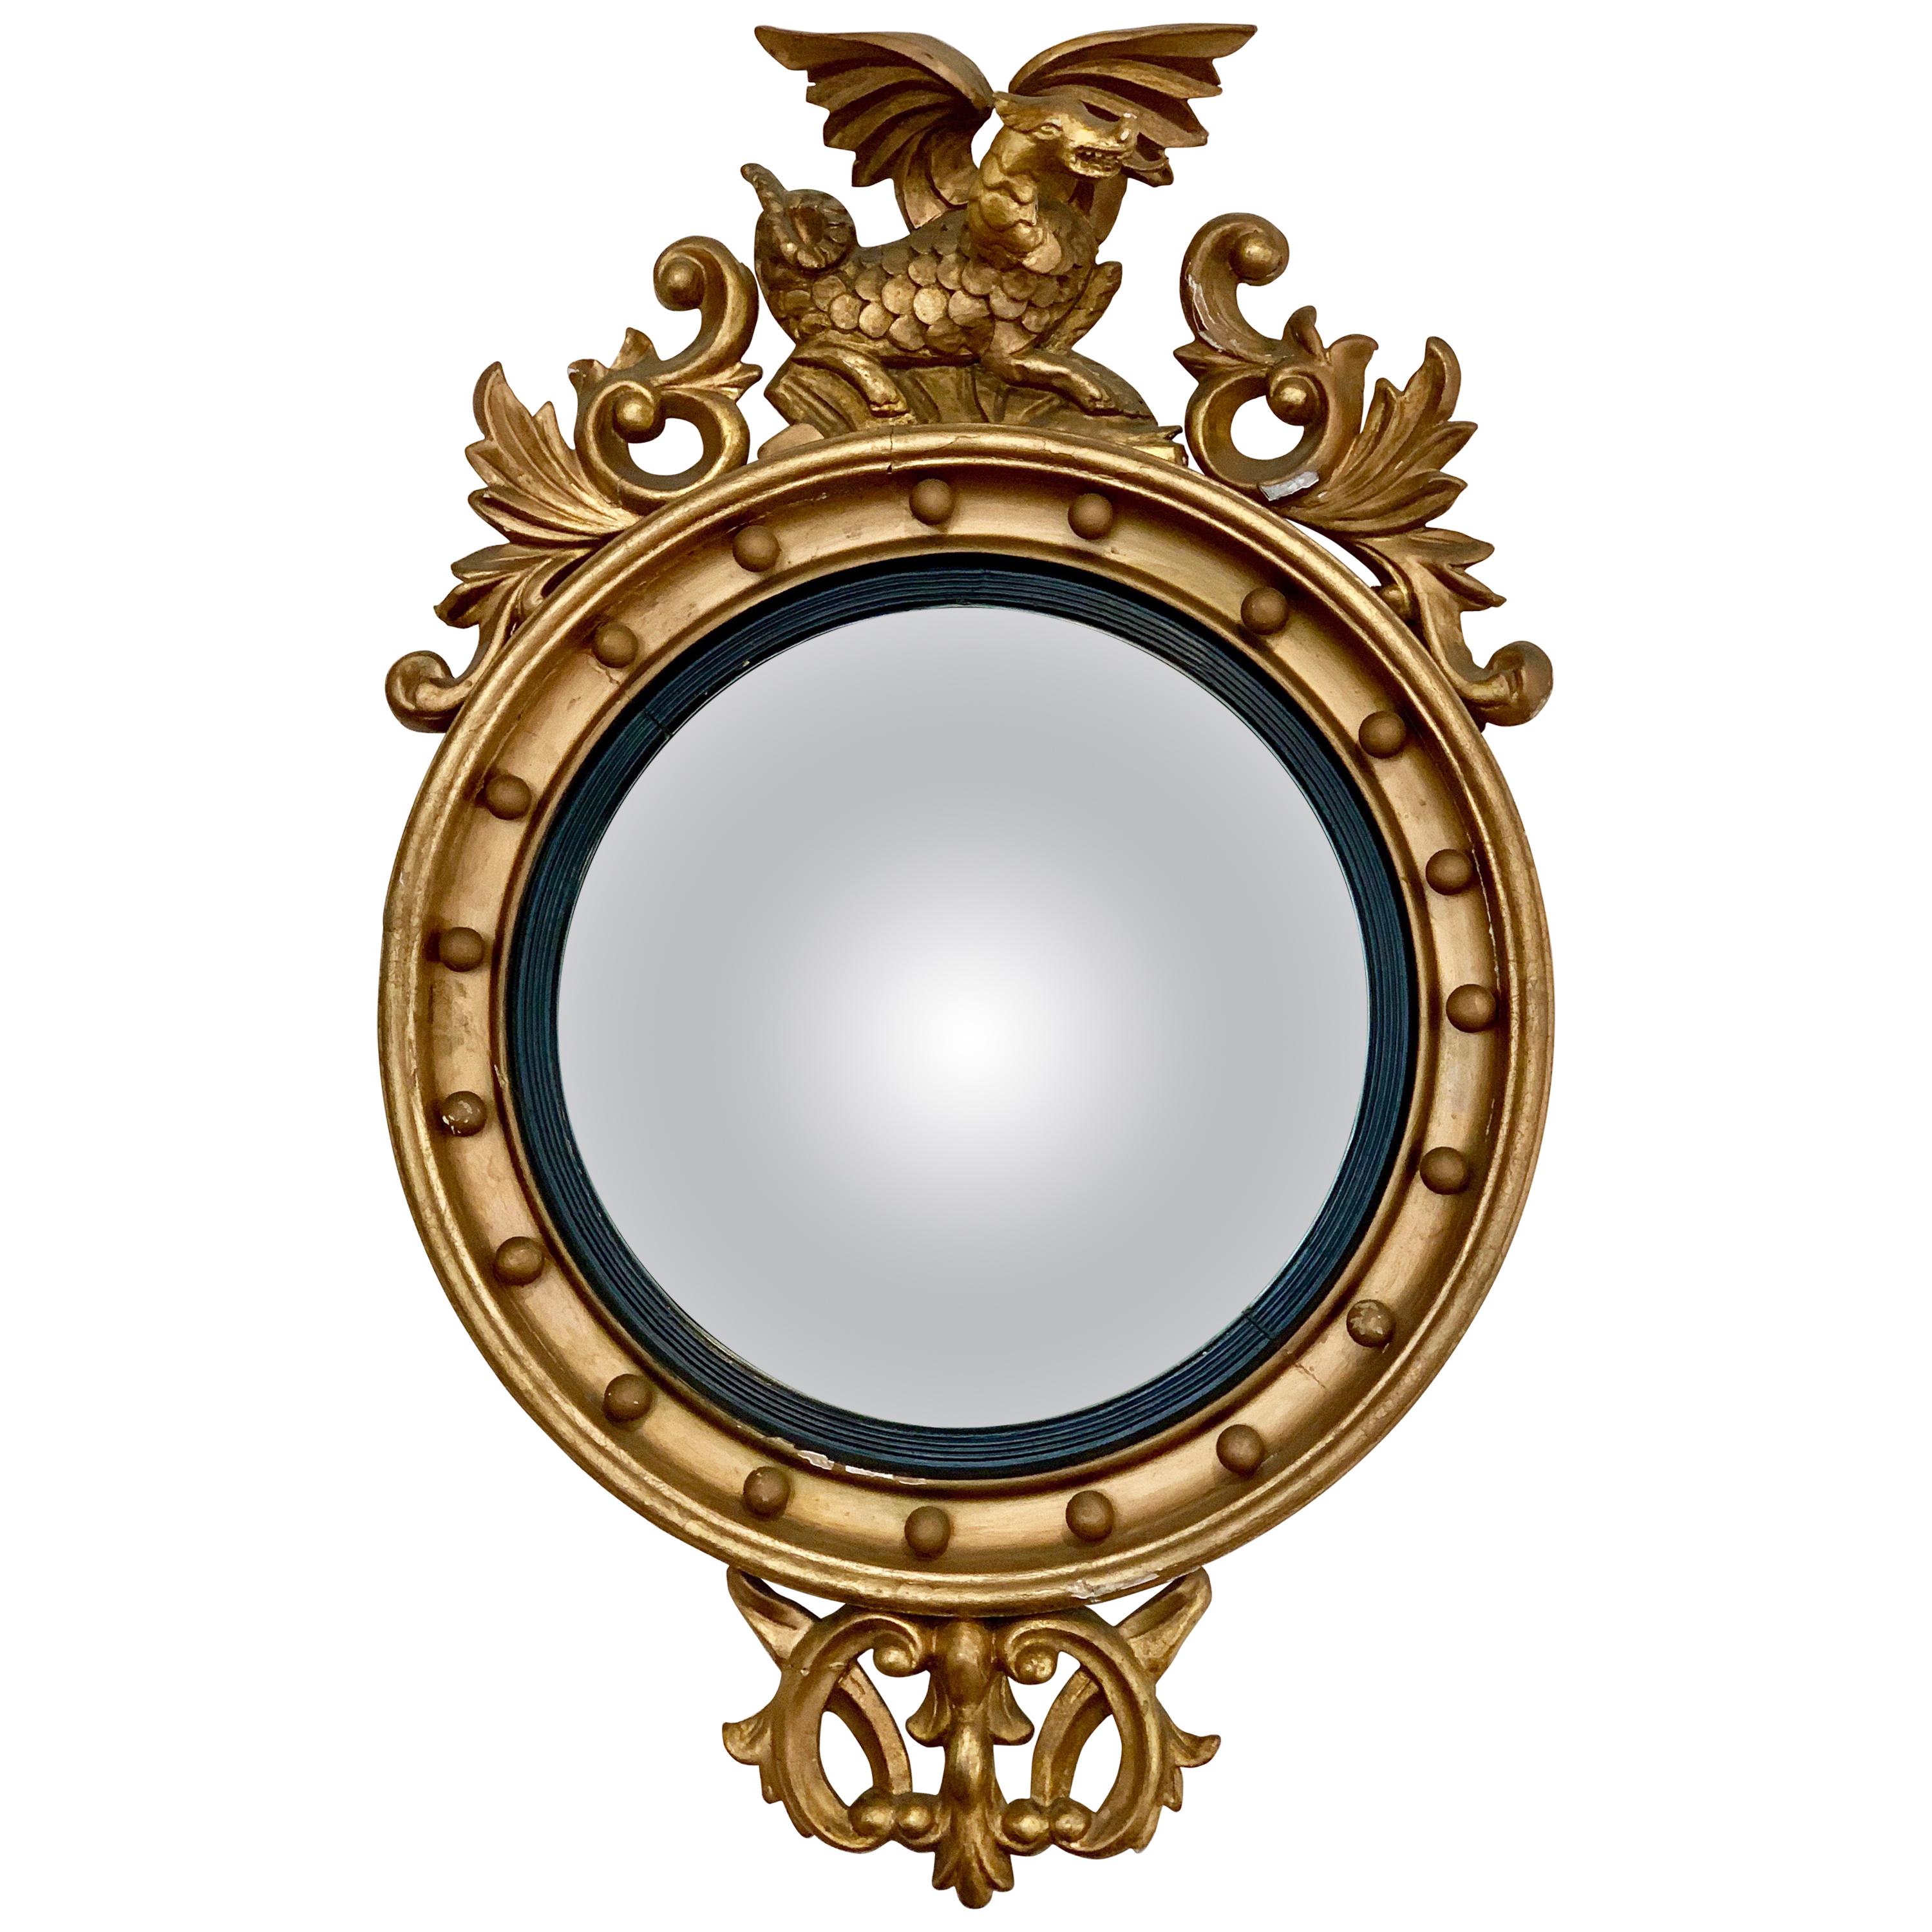 Antique Gold Giltwood Convex Mirror with Winged Dragon